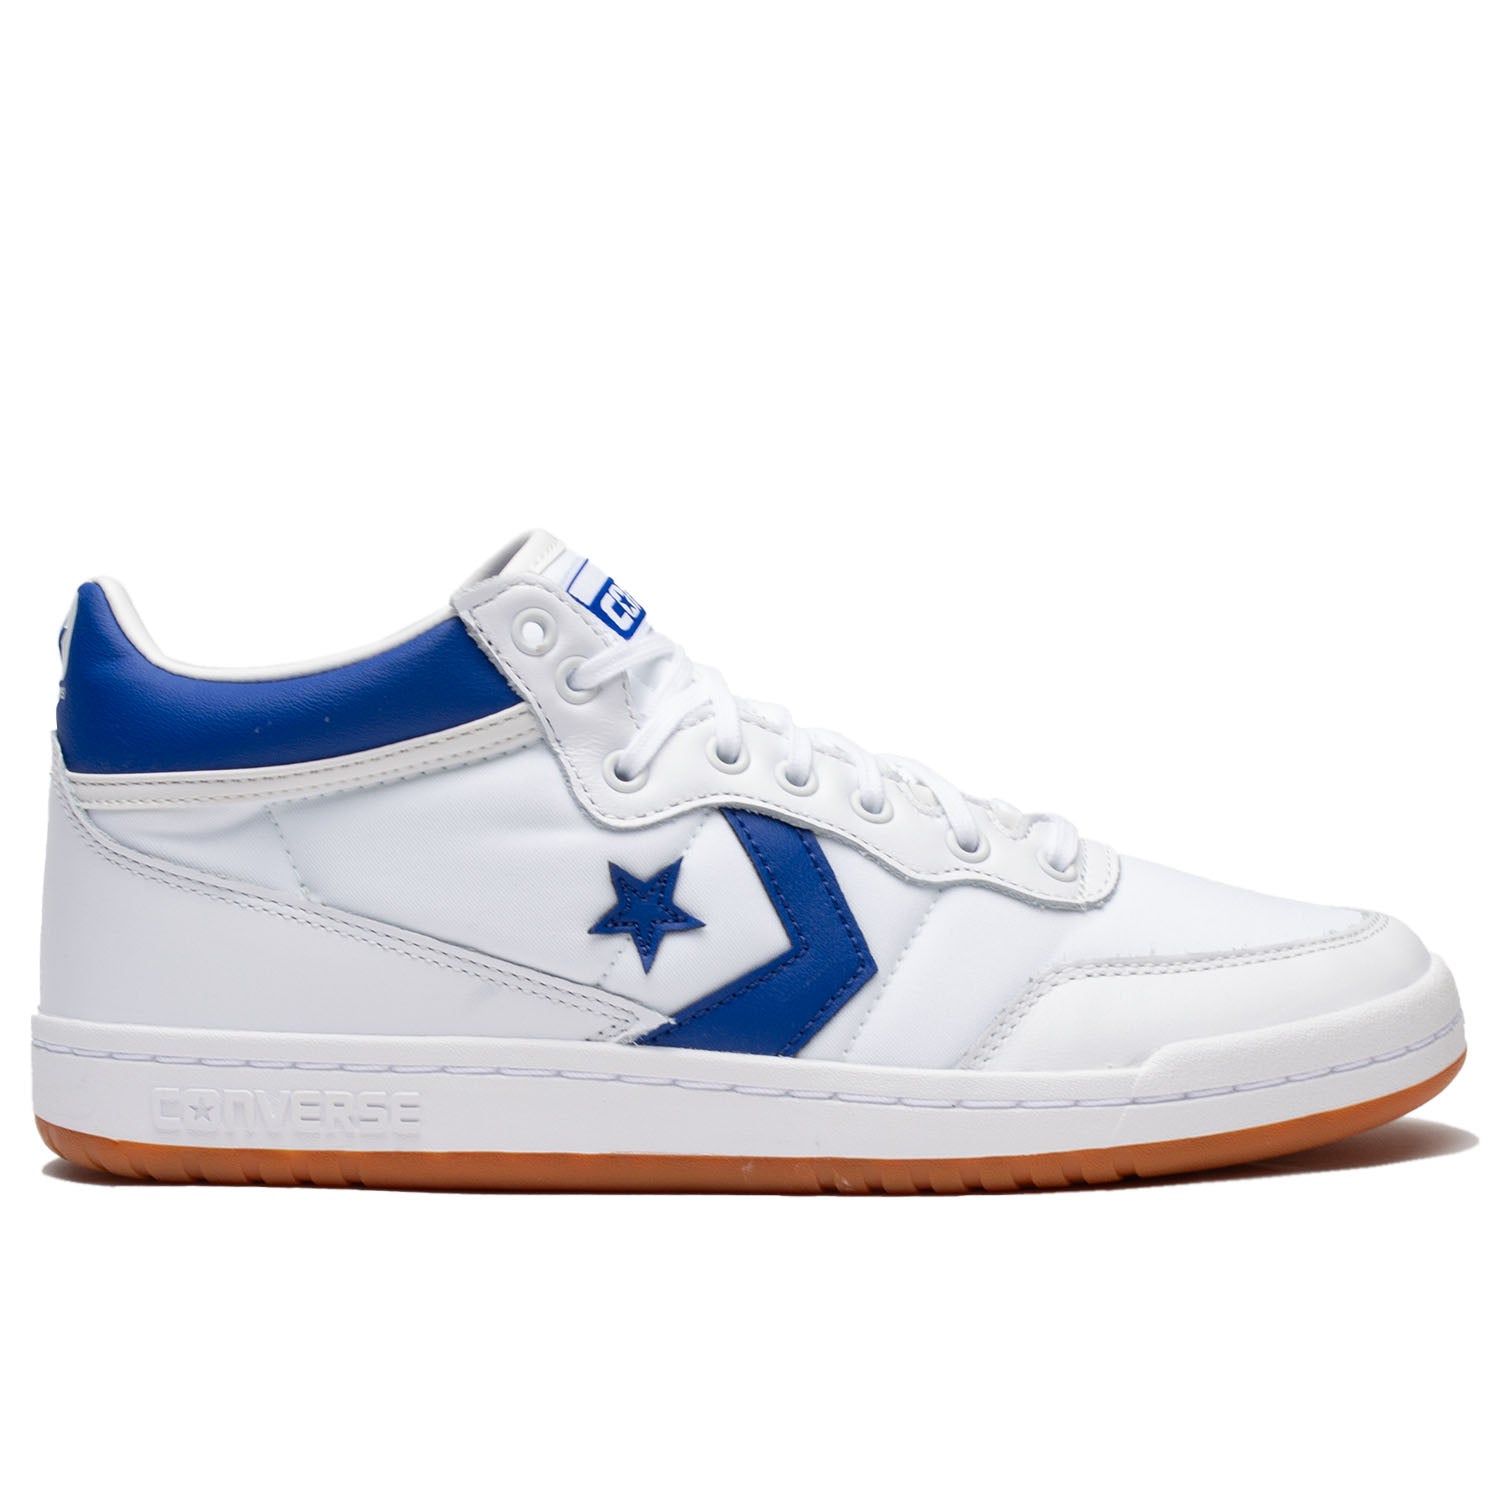 Converse Fastbreak Pro Mid: Retro style meets durability. White sneaker with royal blue accenting color and gum sole. Molded PU sockliner, mid-cut stability, and sleek design for CONS fans. Premium leather, Nylon accents, the Star Chevron logo, and rubber cupsole enhance board feel.